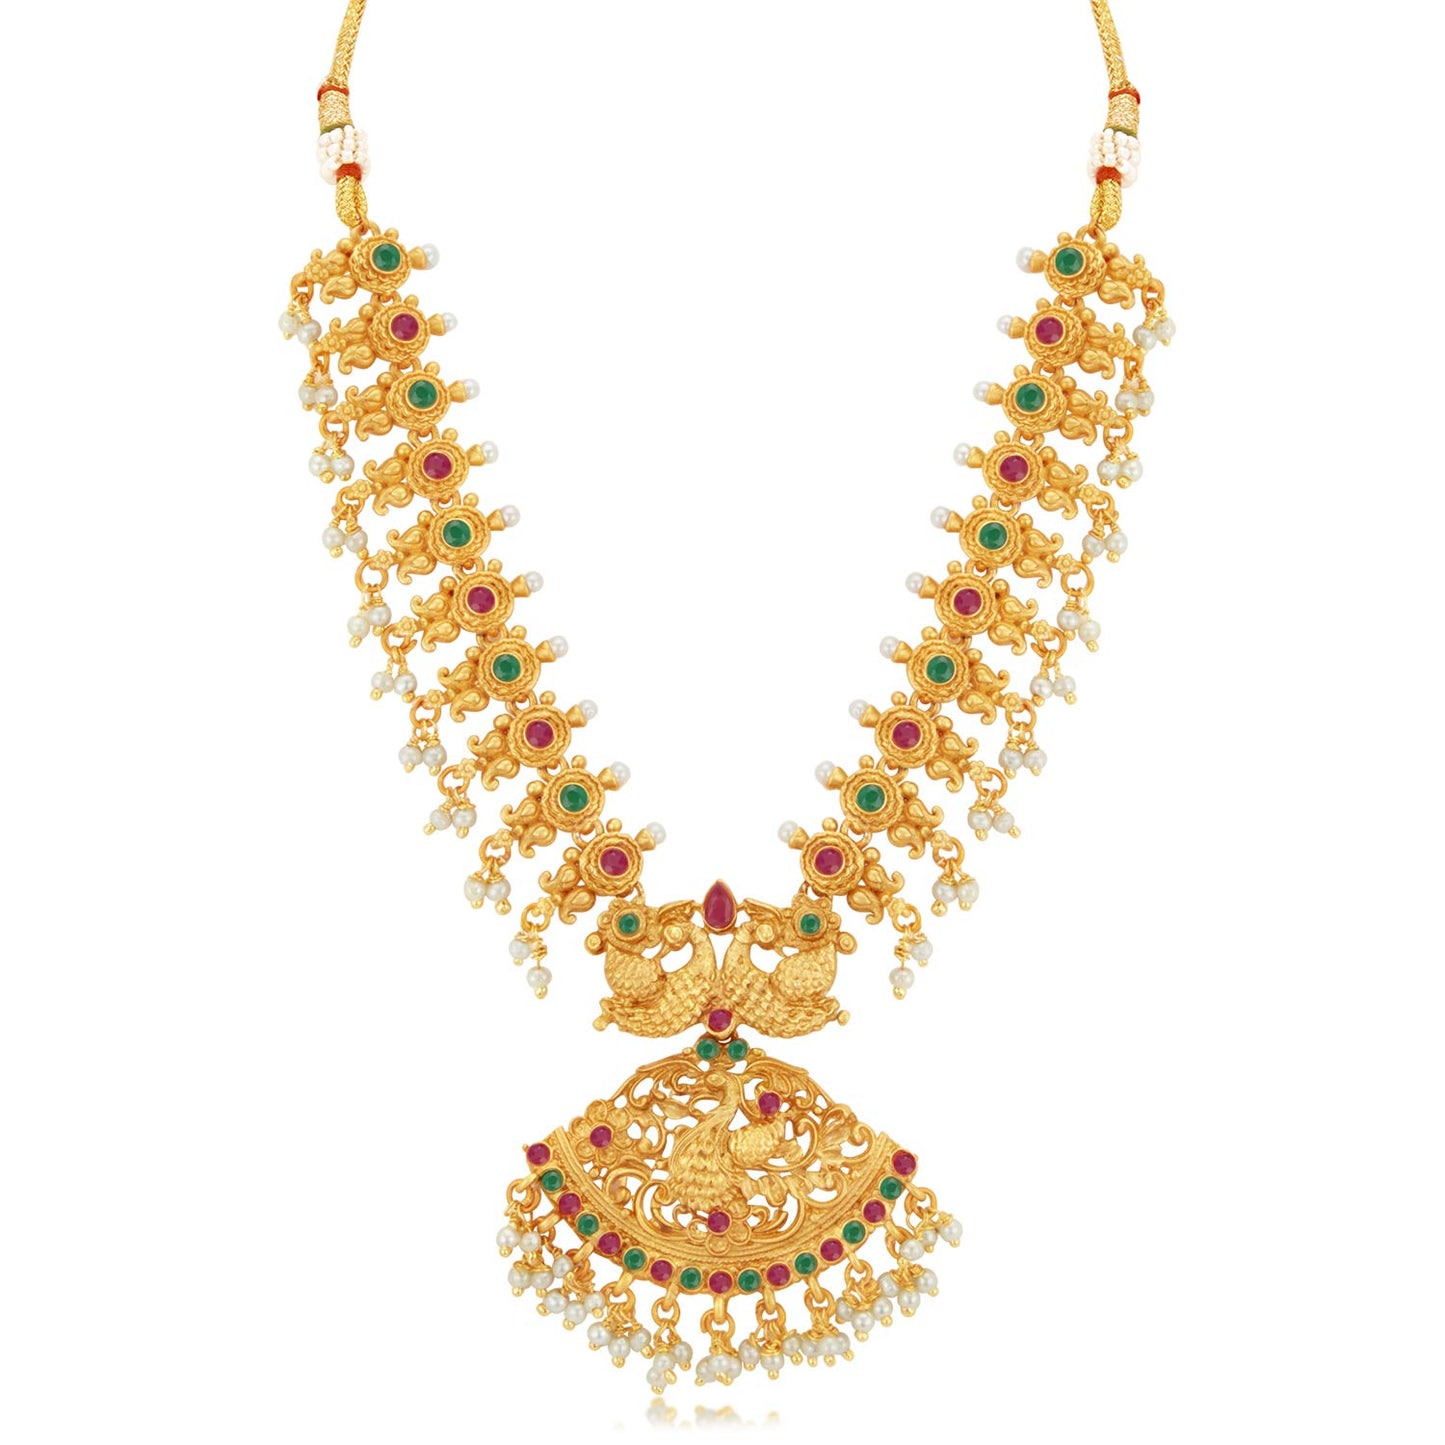 Sukkhi Classic Pearl Gold Plated Long Haram Necklace Set for Women (SKR70419), Pink & Green, Free Size